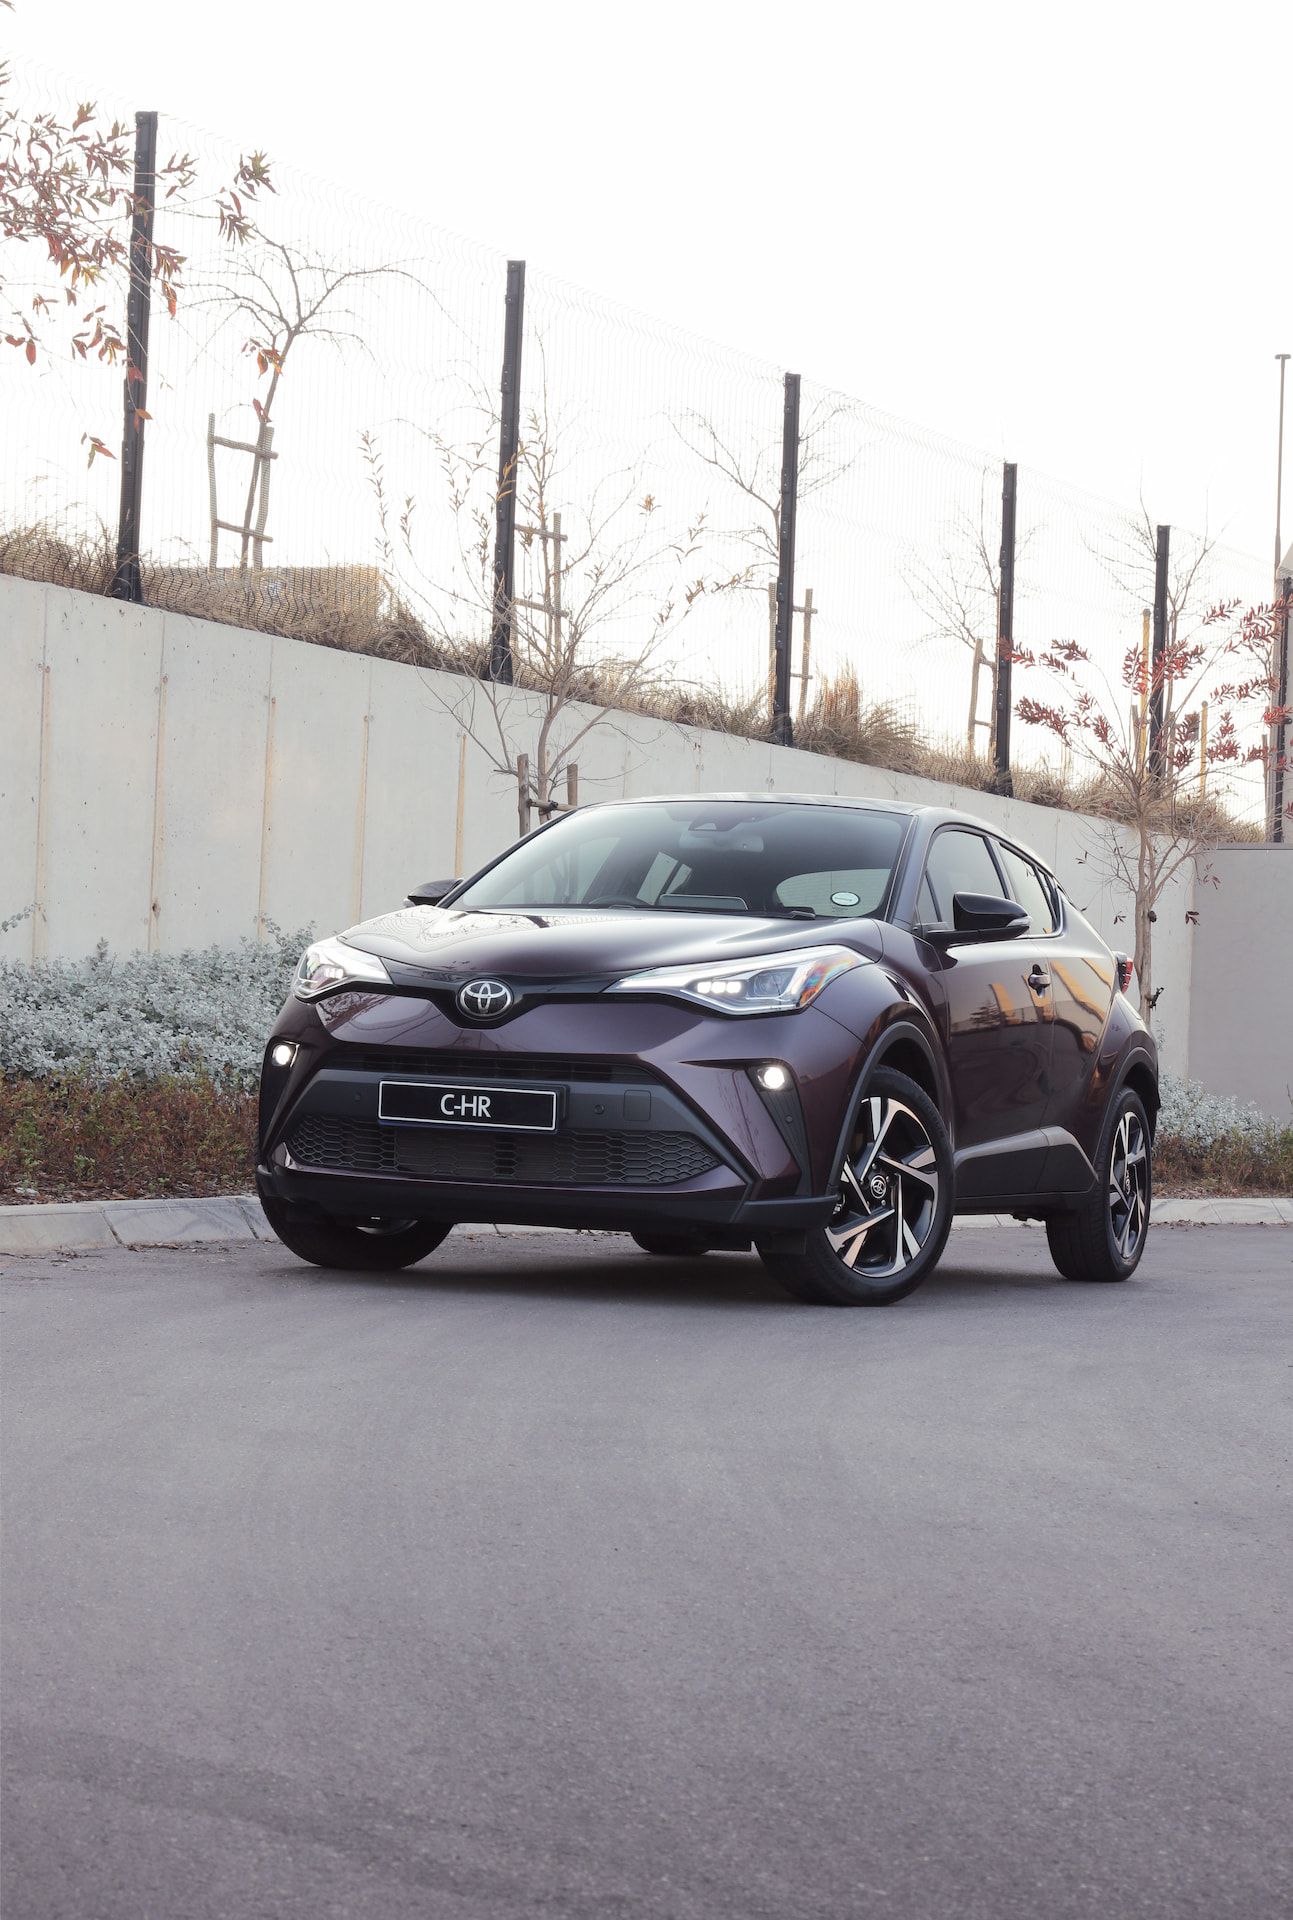 Toyota C-HR: The South African Stylish and Capable Crossover SUV